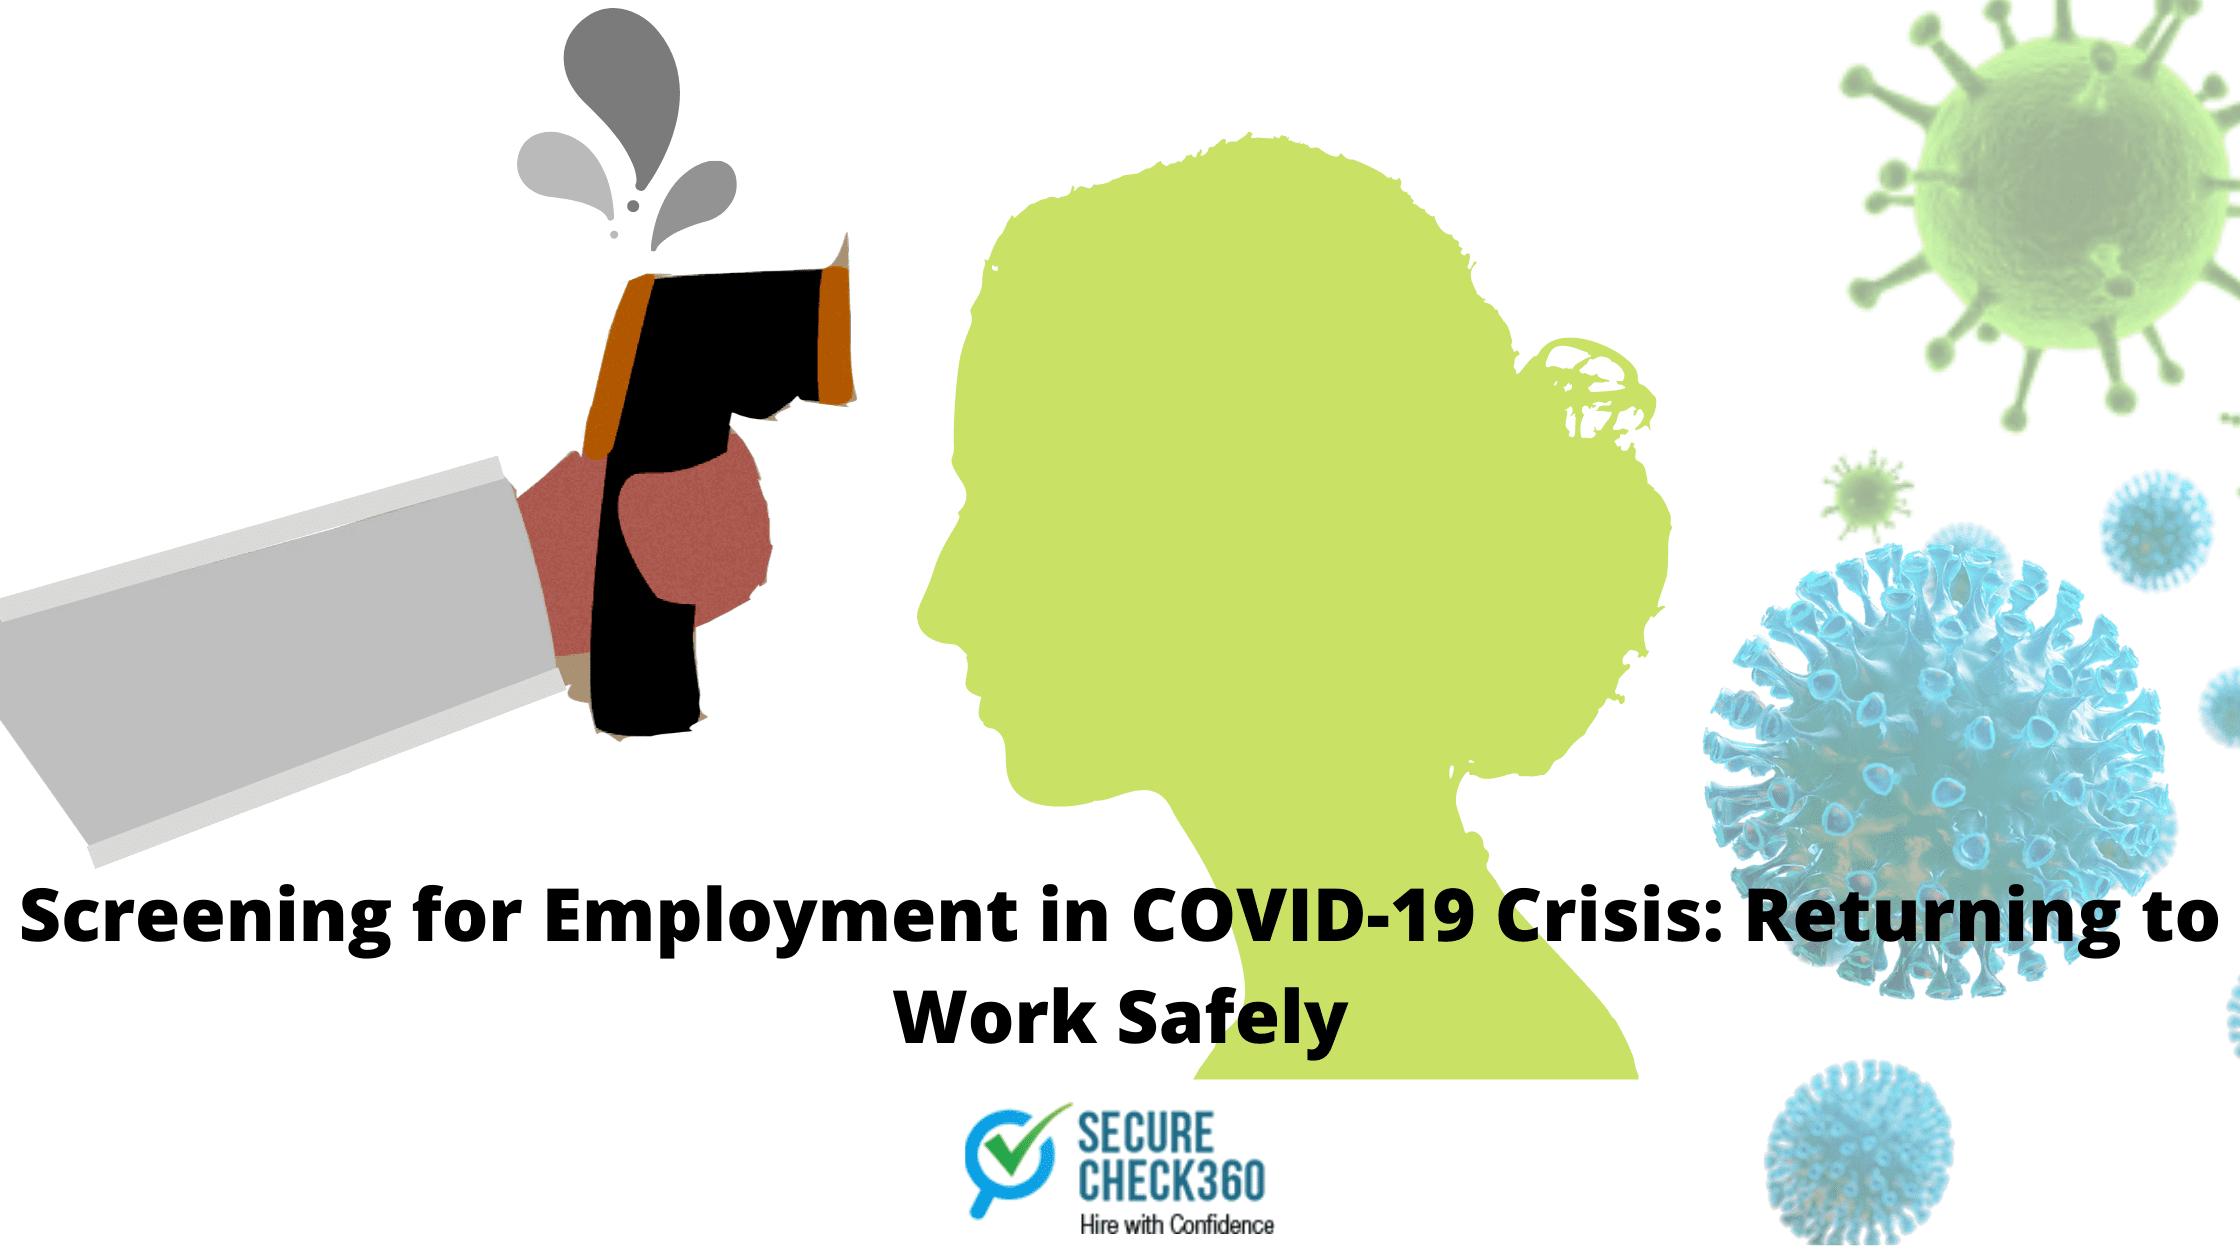 Return to Work Safely: Screening for Employees in COVID-19